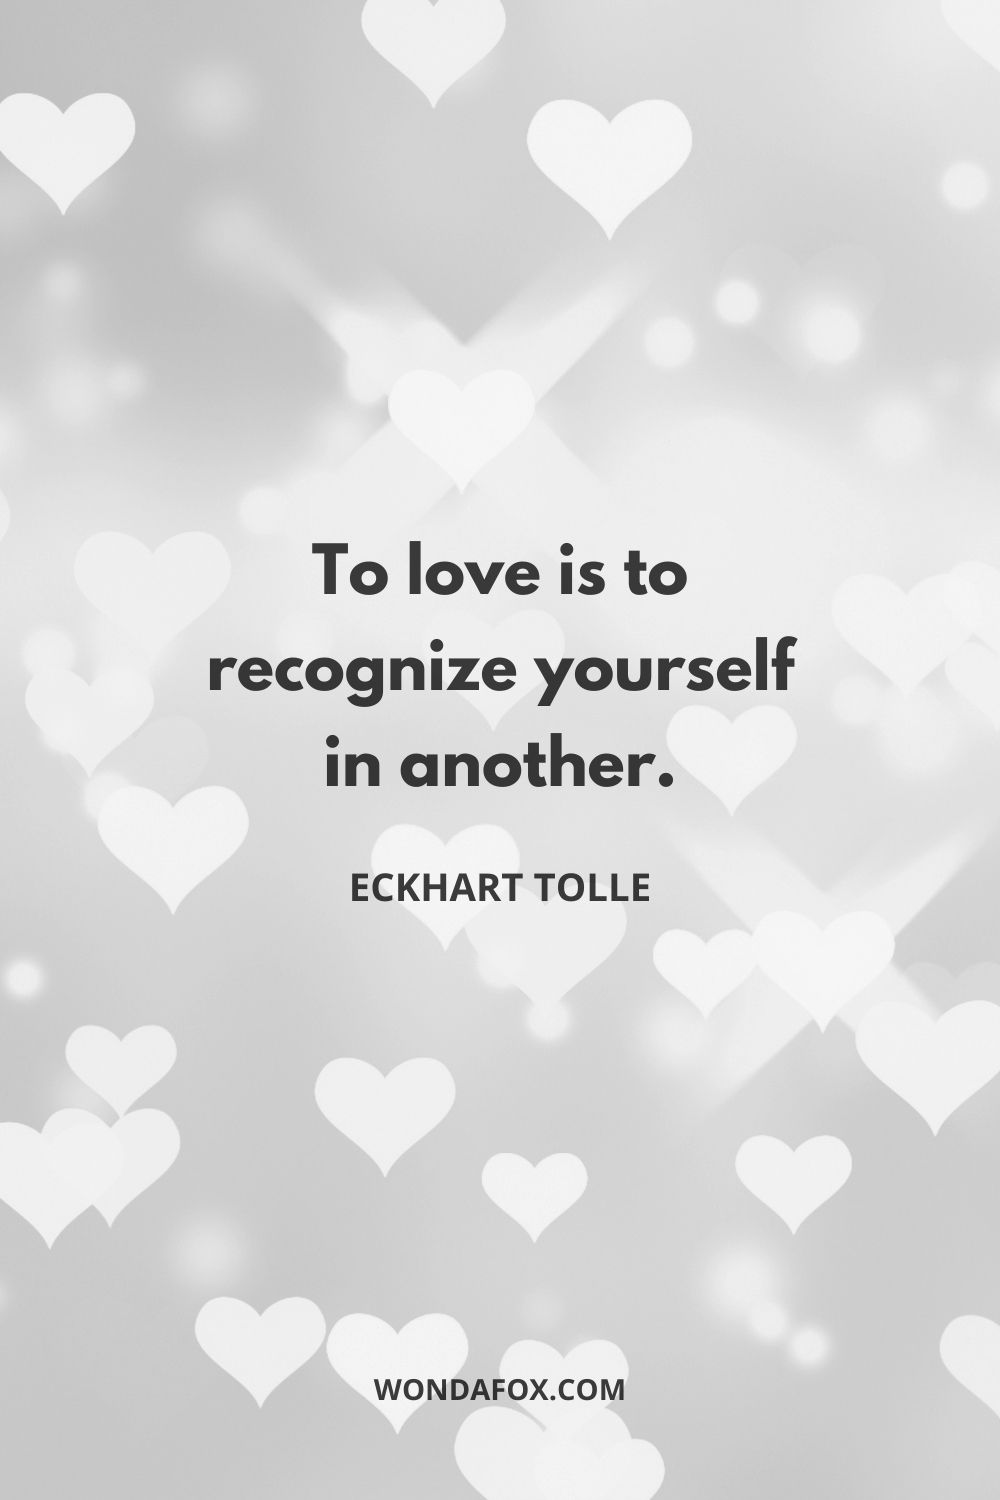 To love is to recognize yourself in another.